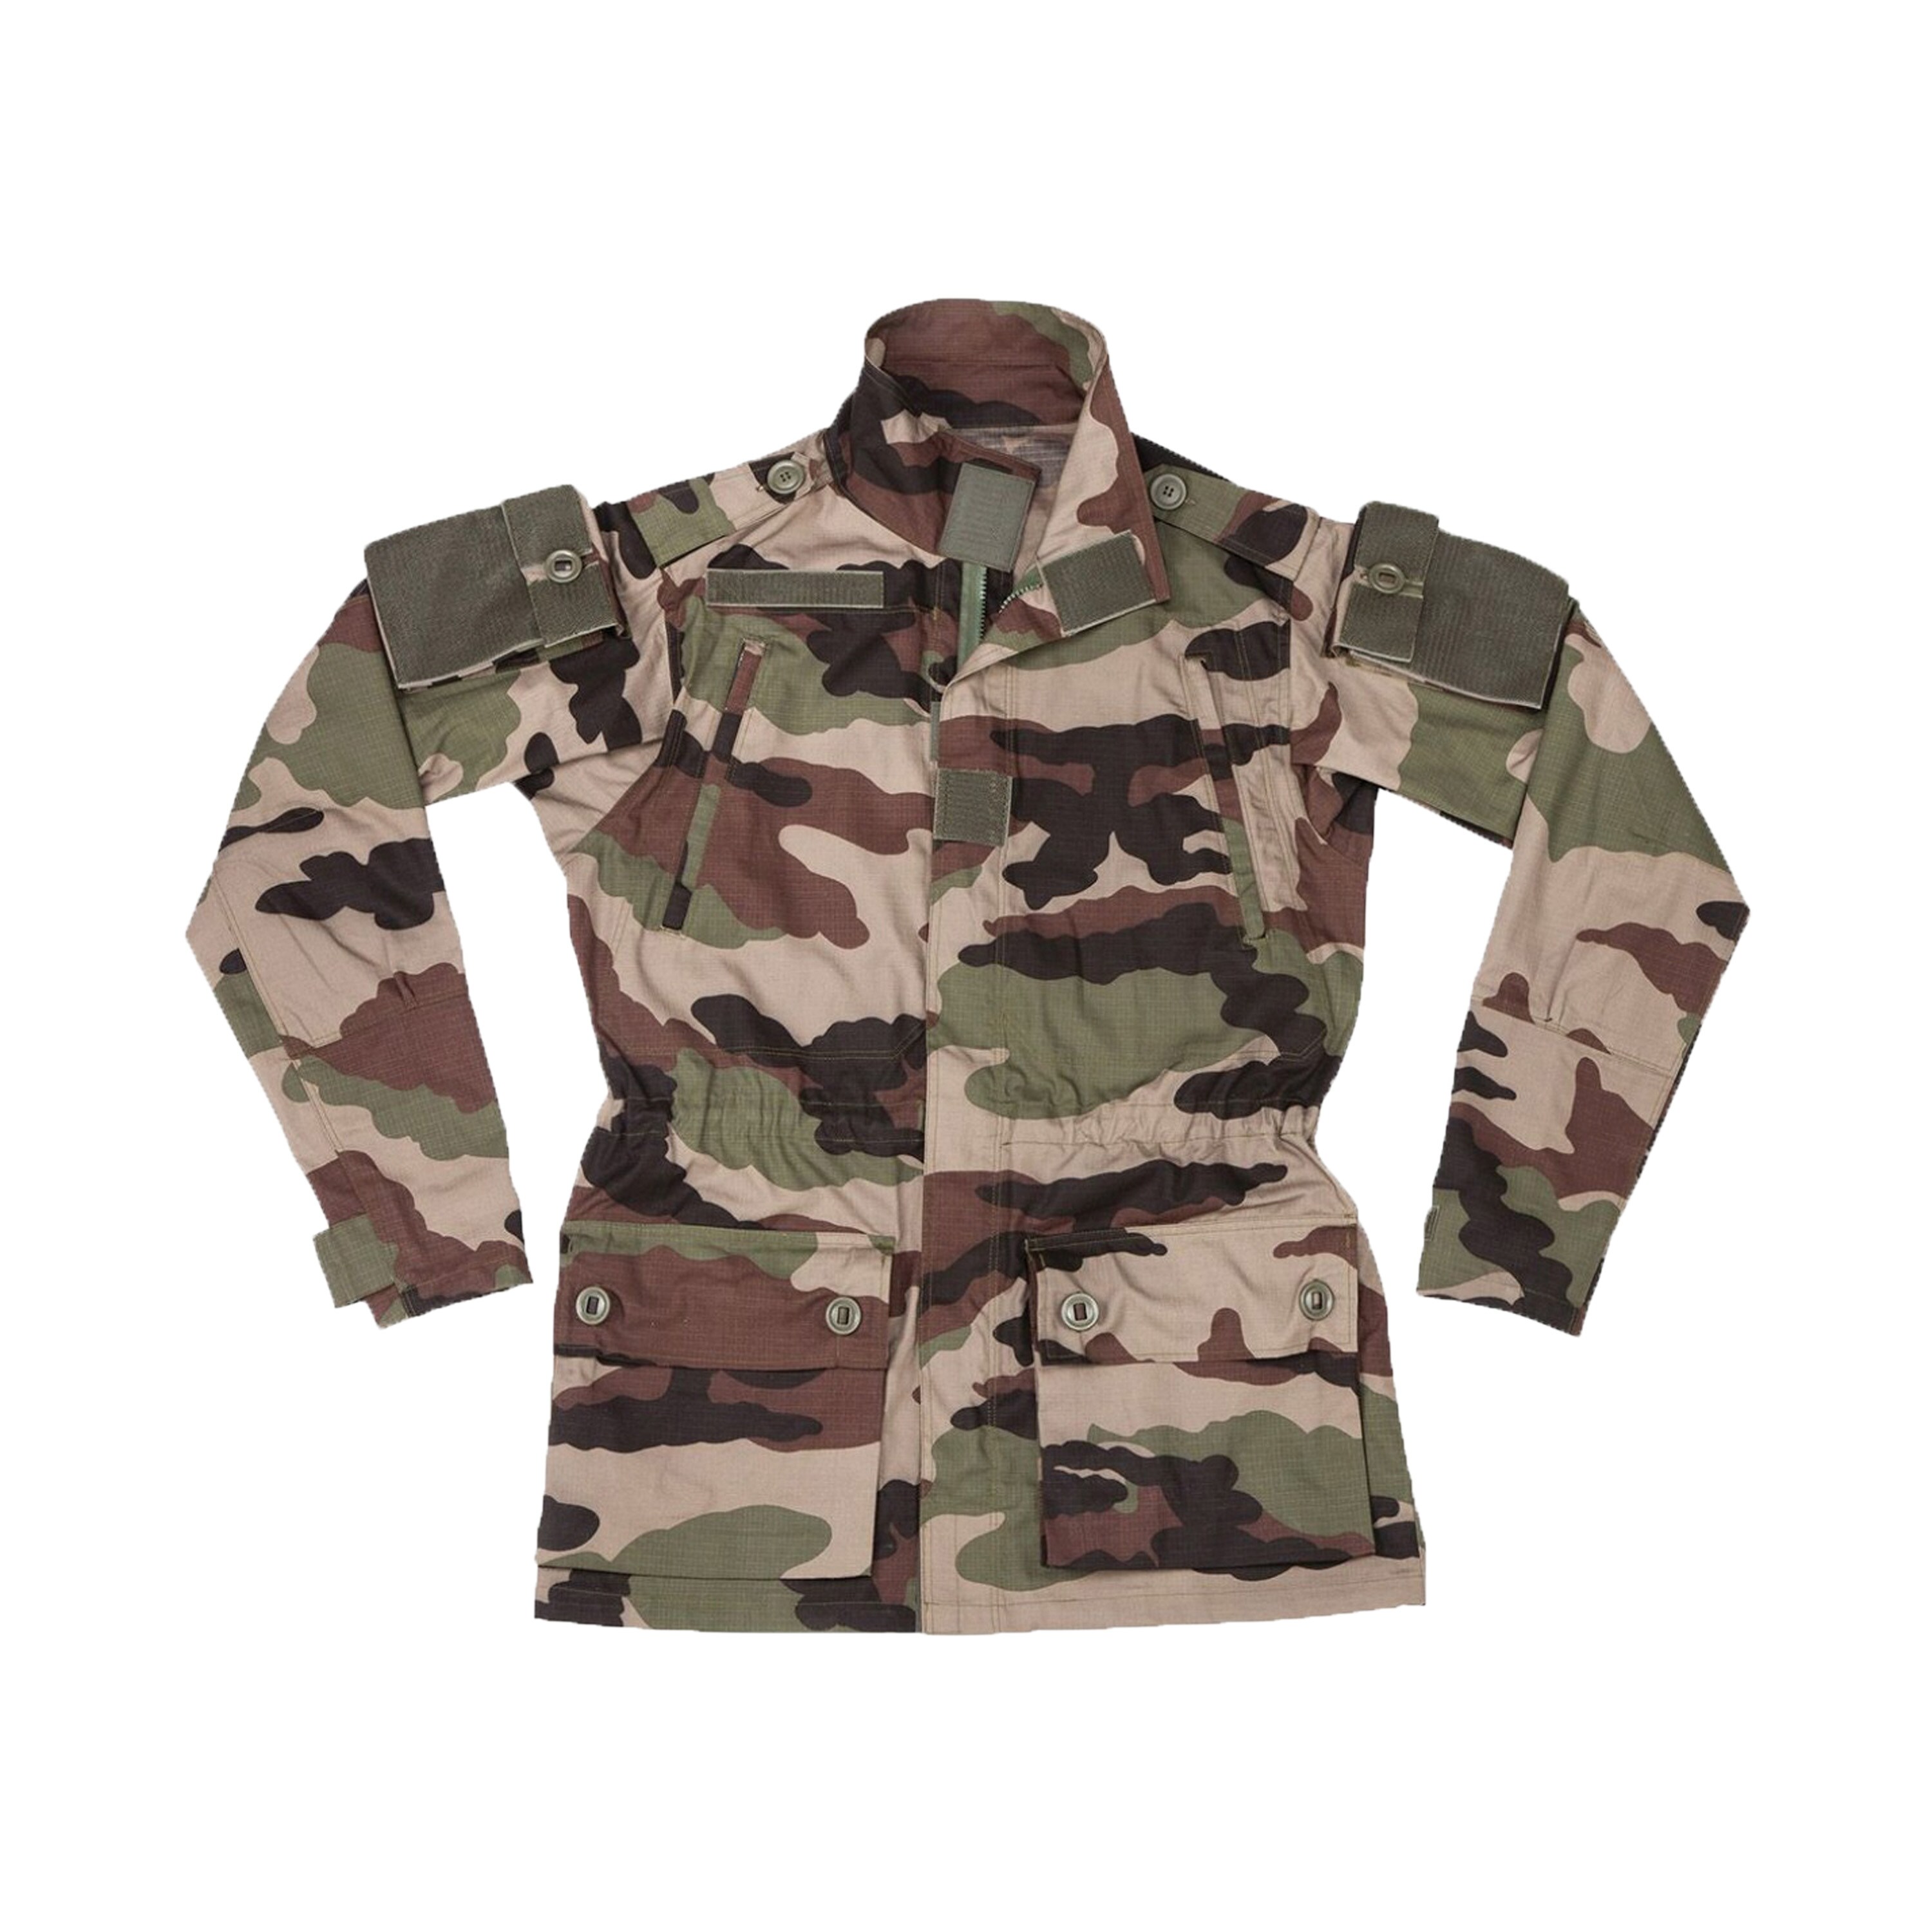 Mil-Tec Chemise Militaire Anglaise ripstop robuste Coyote Loisirs 